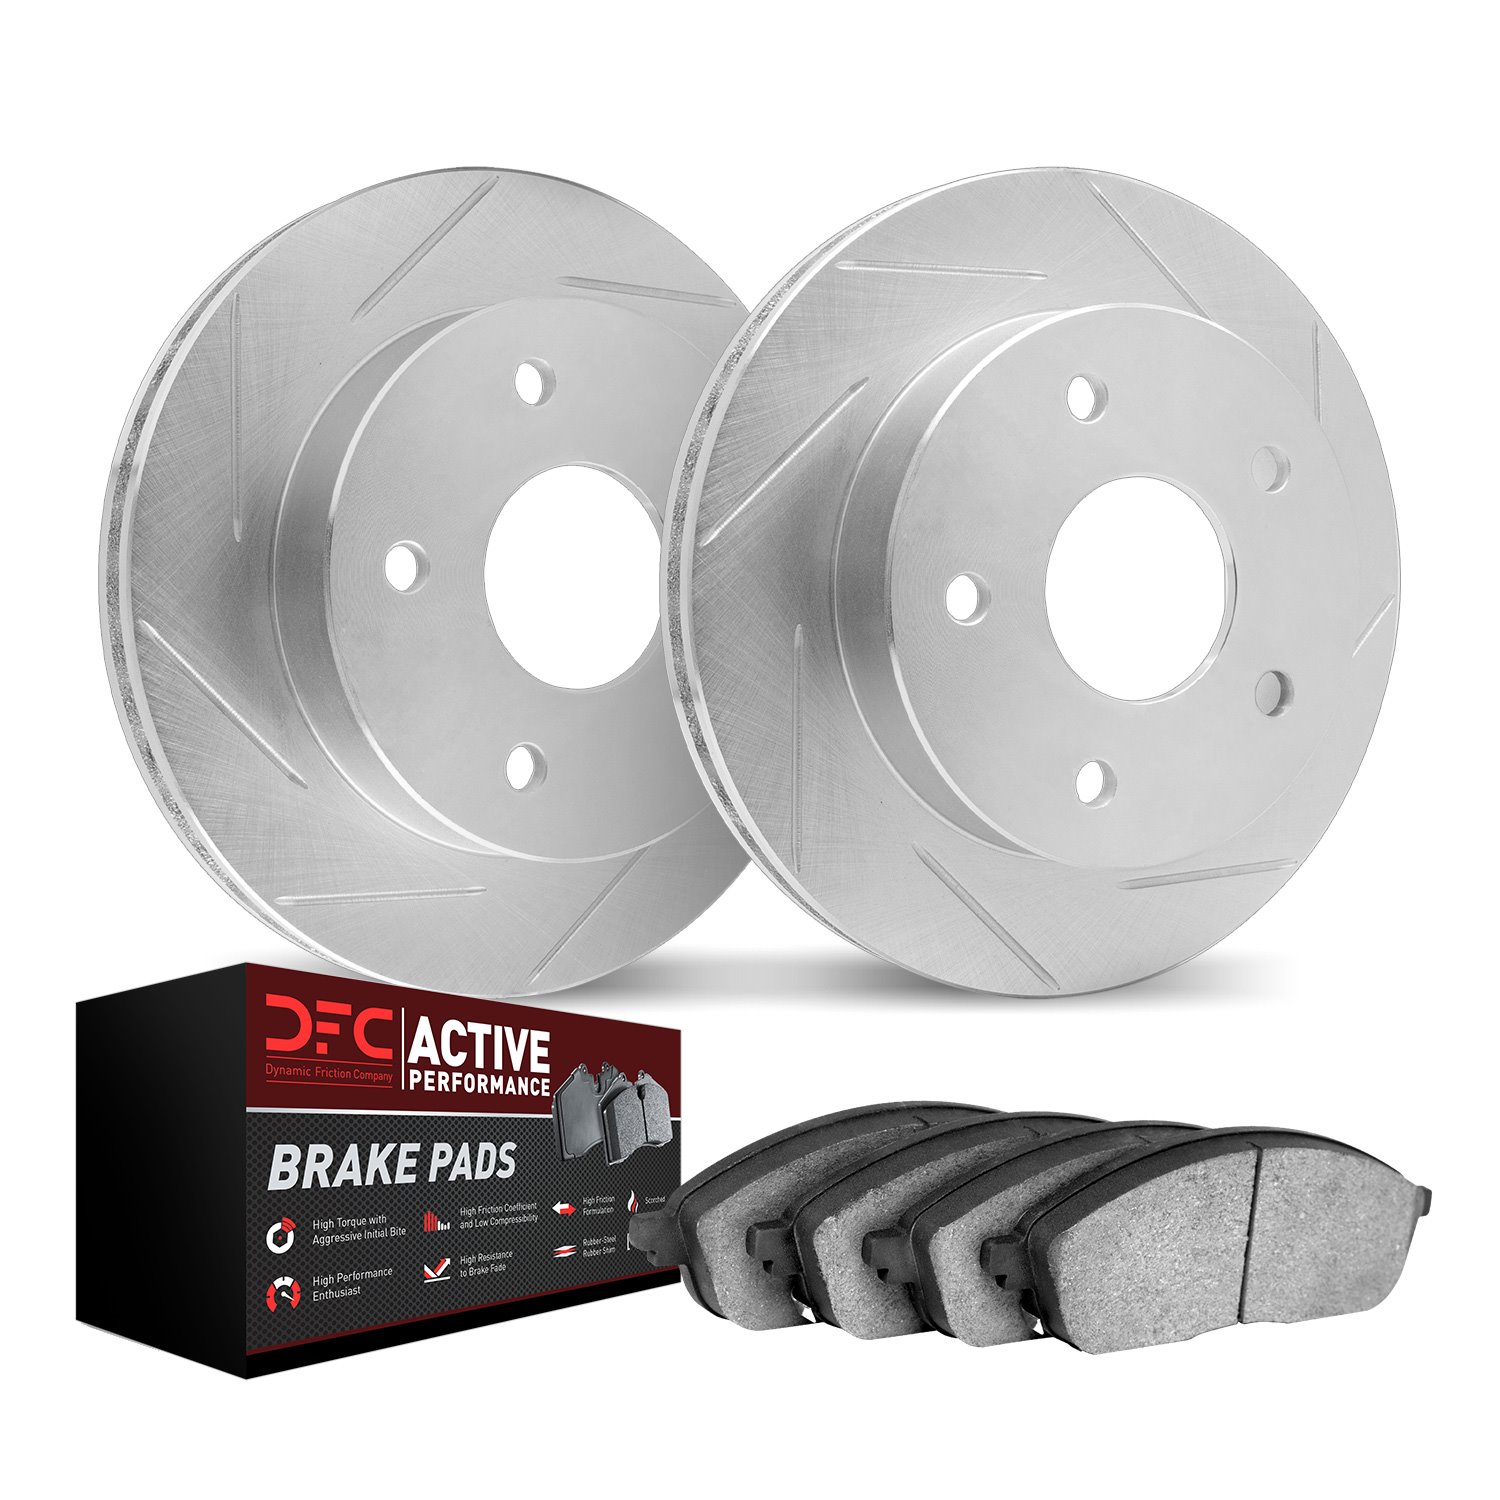 2702-02027 Geoperformance Slotted Brake Rotors with Active Performance Pads Kits, 1989-1997 Porsche, Position: Front